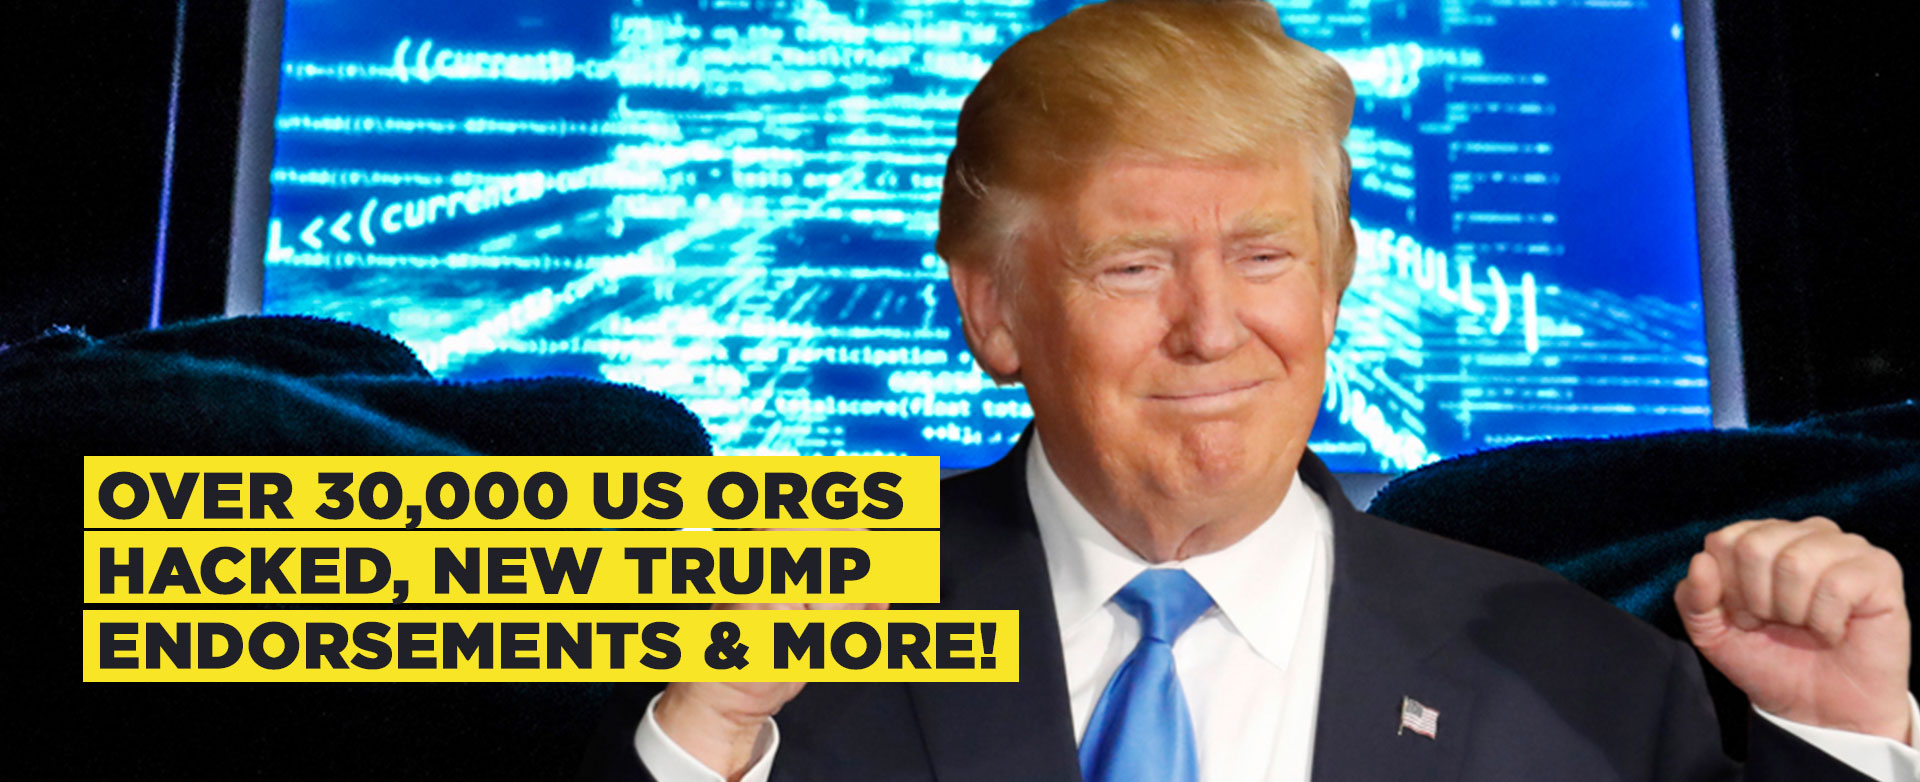 MyPatriotsNetwork-Over 30,000 US Orgs Hacked, New Trump Endorsements & More! March 6, 2021 Update